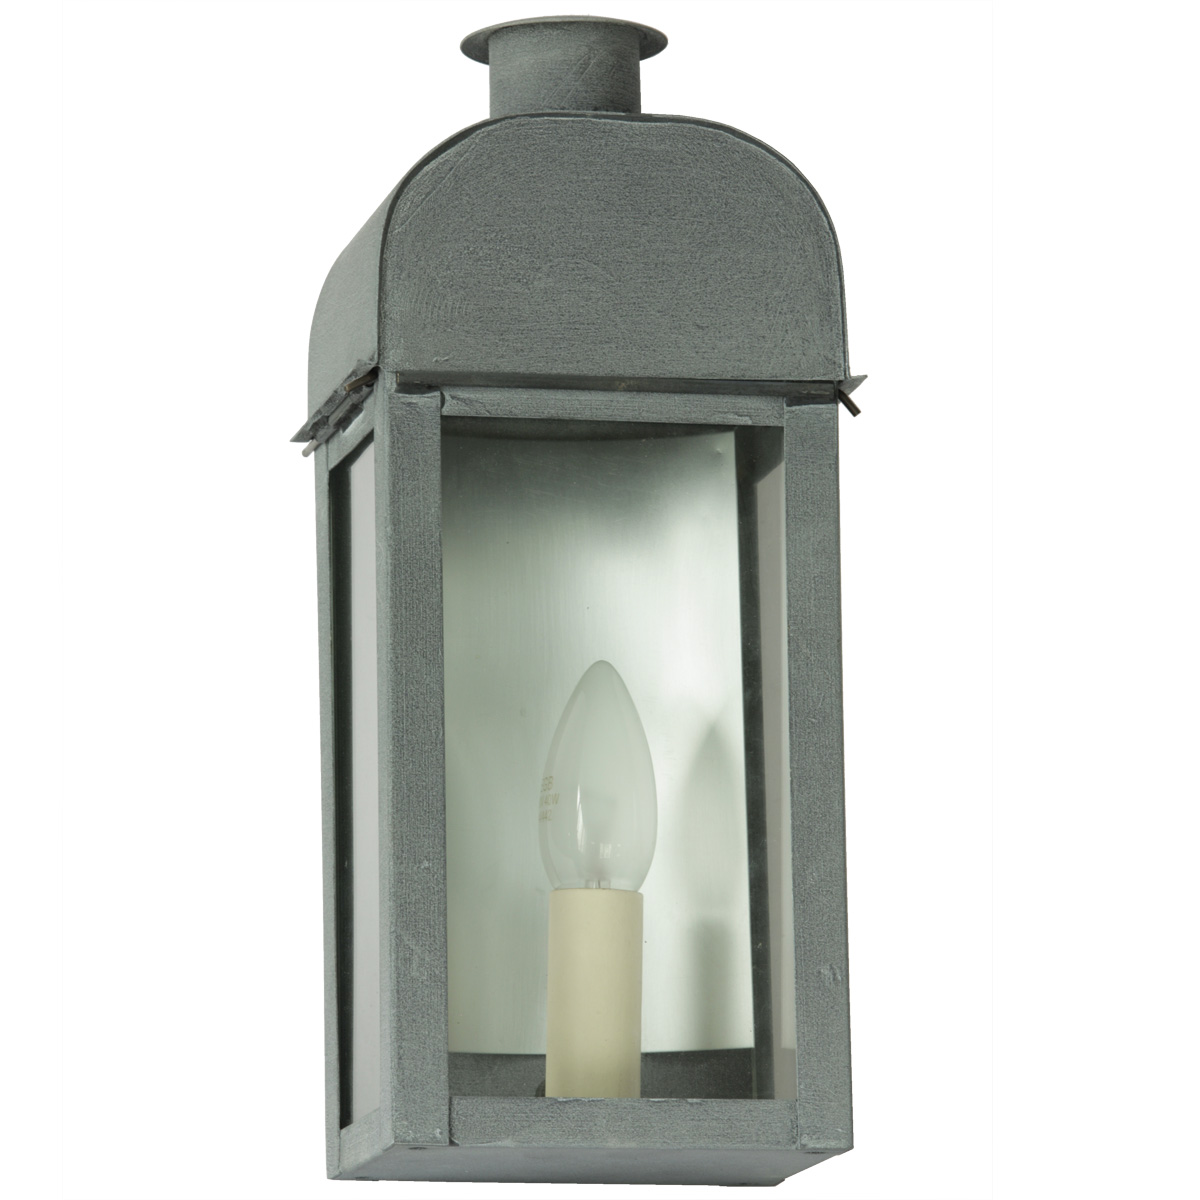 Small rustic wall light with "chimney" Swansea TPM